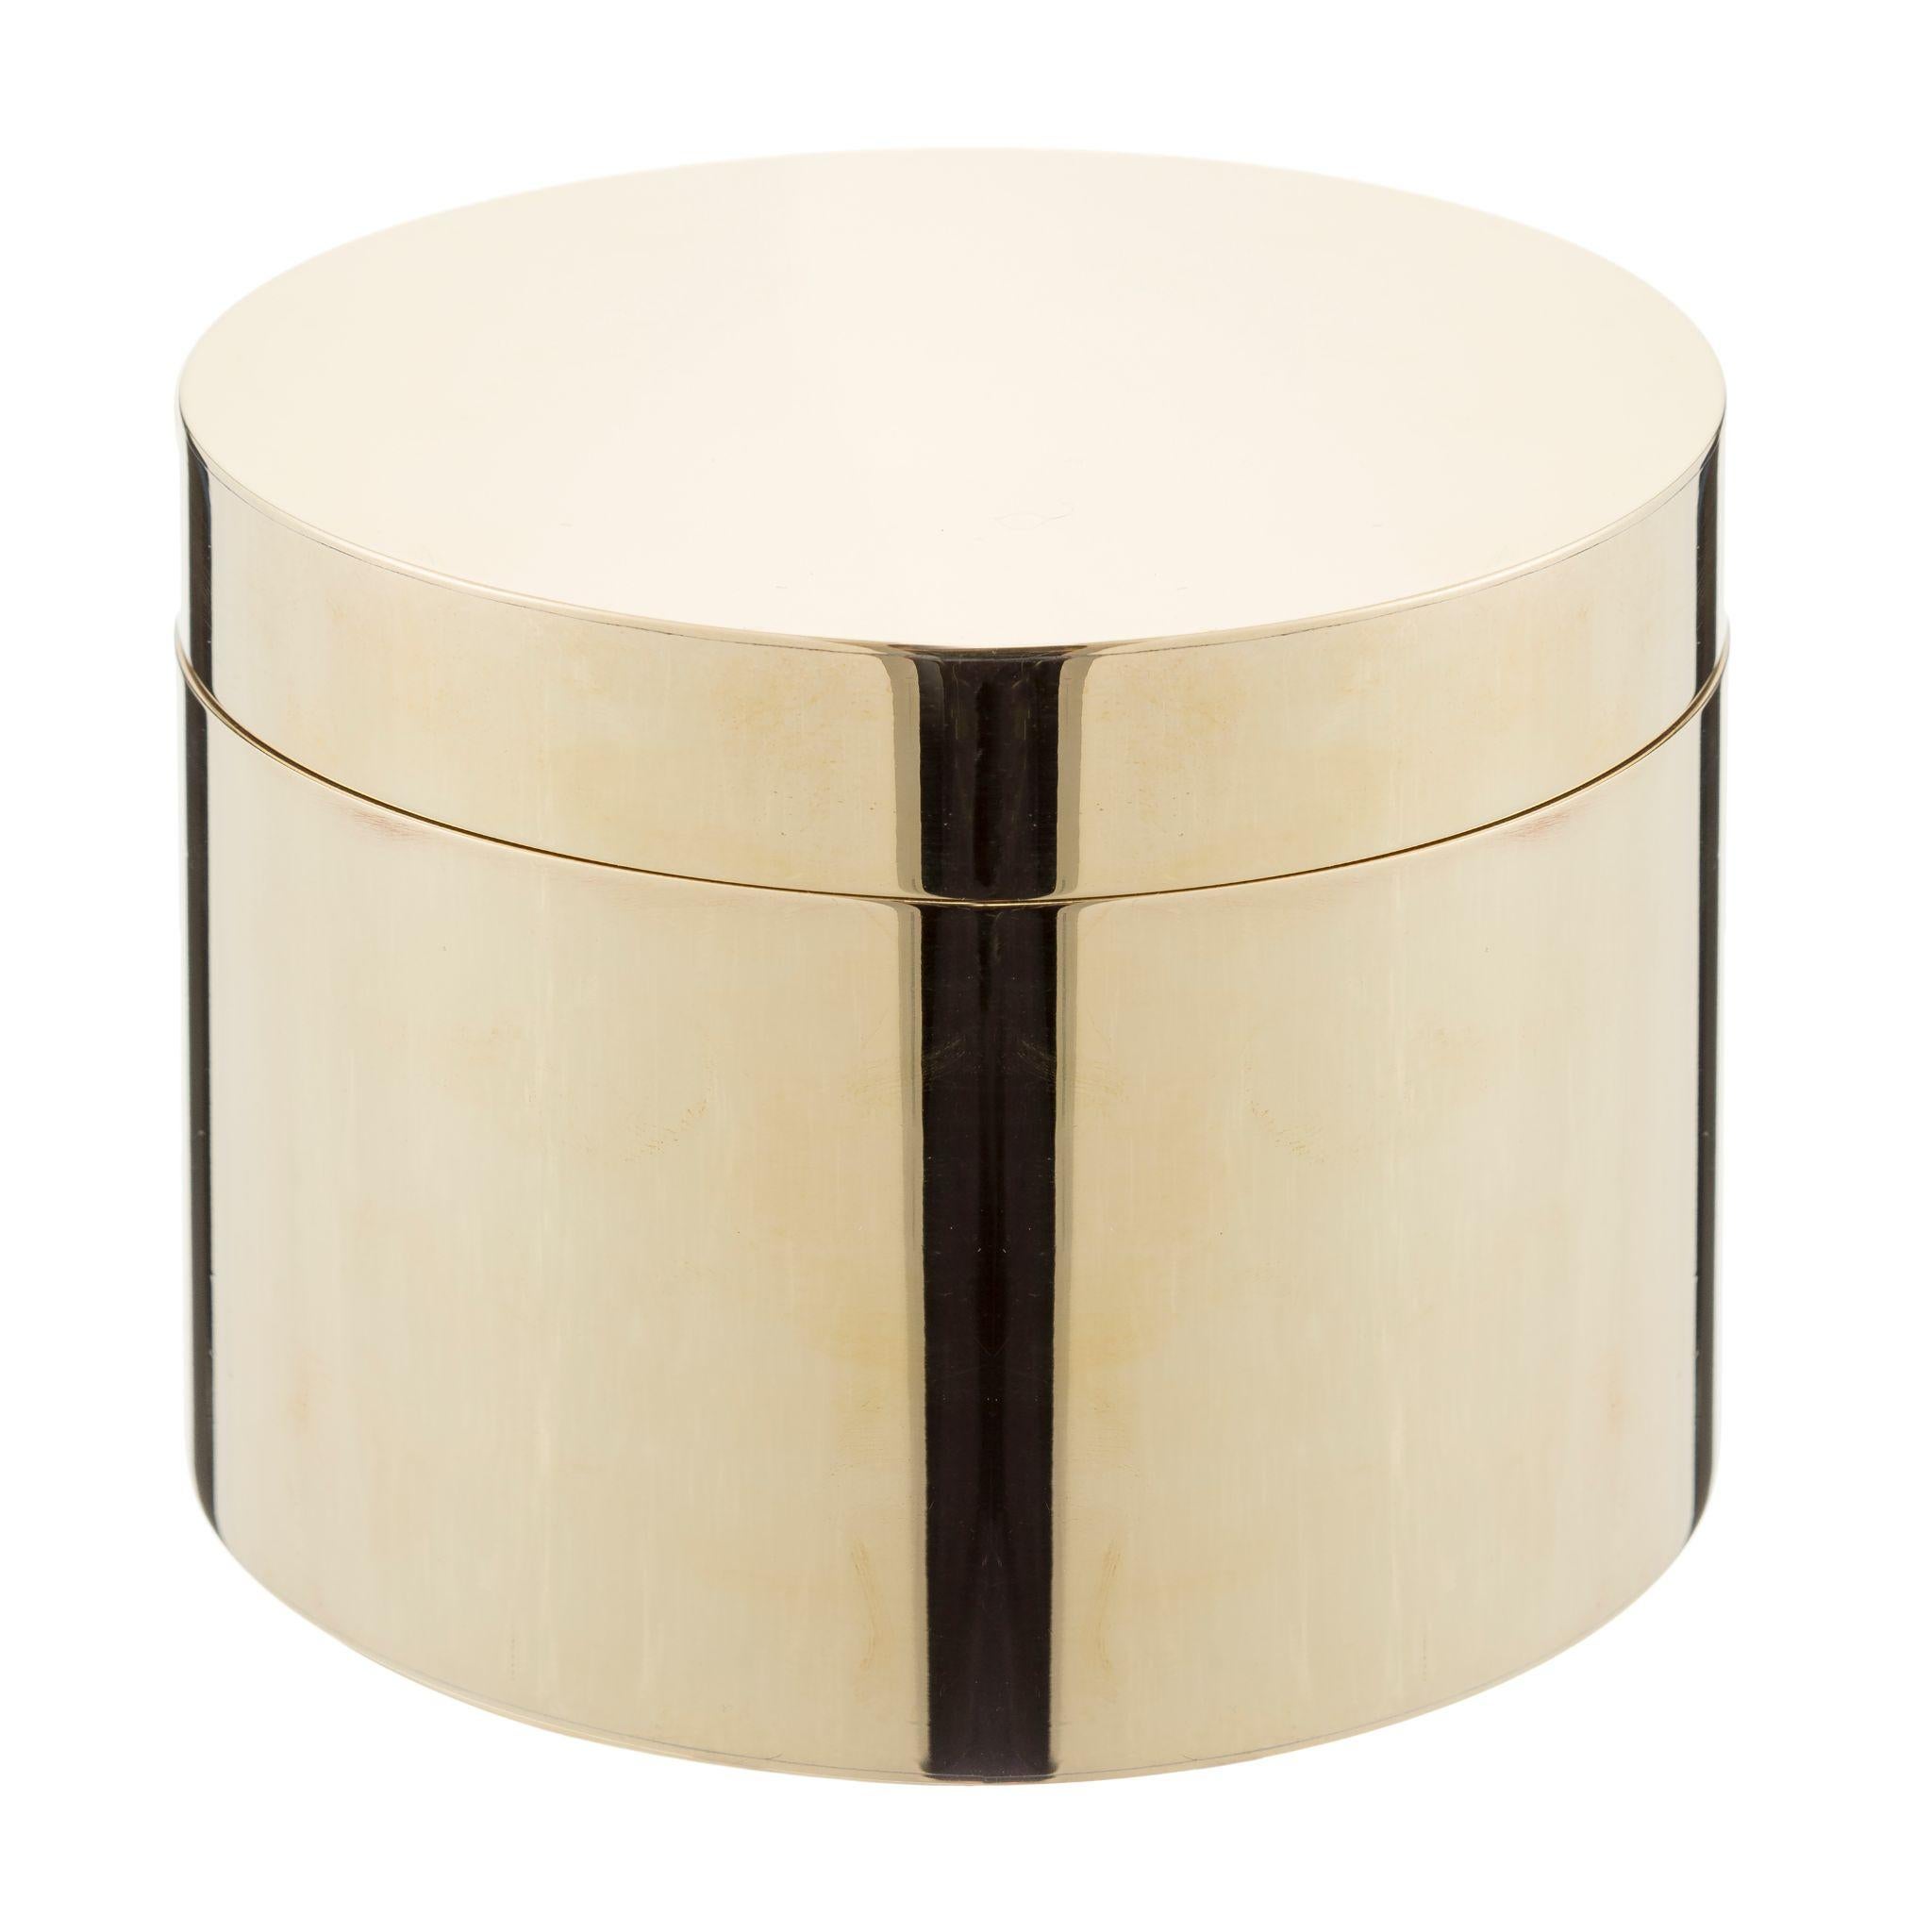 Organize your small items in style with our elegant circular-shaped brass box. Made from high-quality brass, its unique and stylish design adds sophistication to any space. Perfect for storing jewelry, trinkets, and other small items, it is a